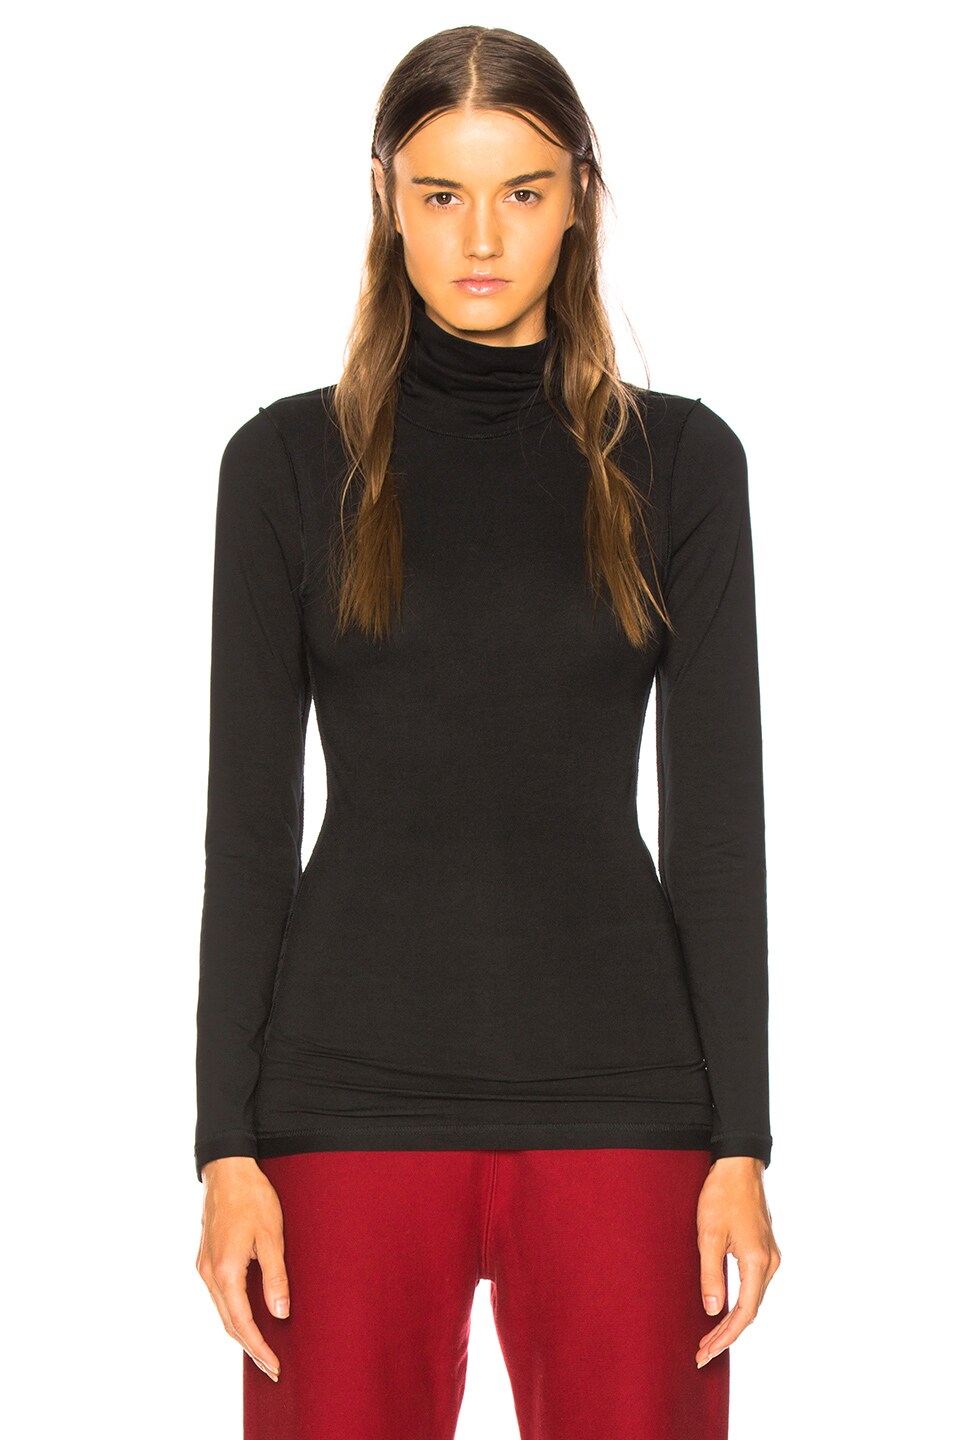 VETEMENTS Fitted Inside Out Long Sleeve Turtleneck in Black | FWRD